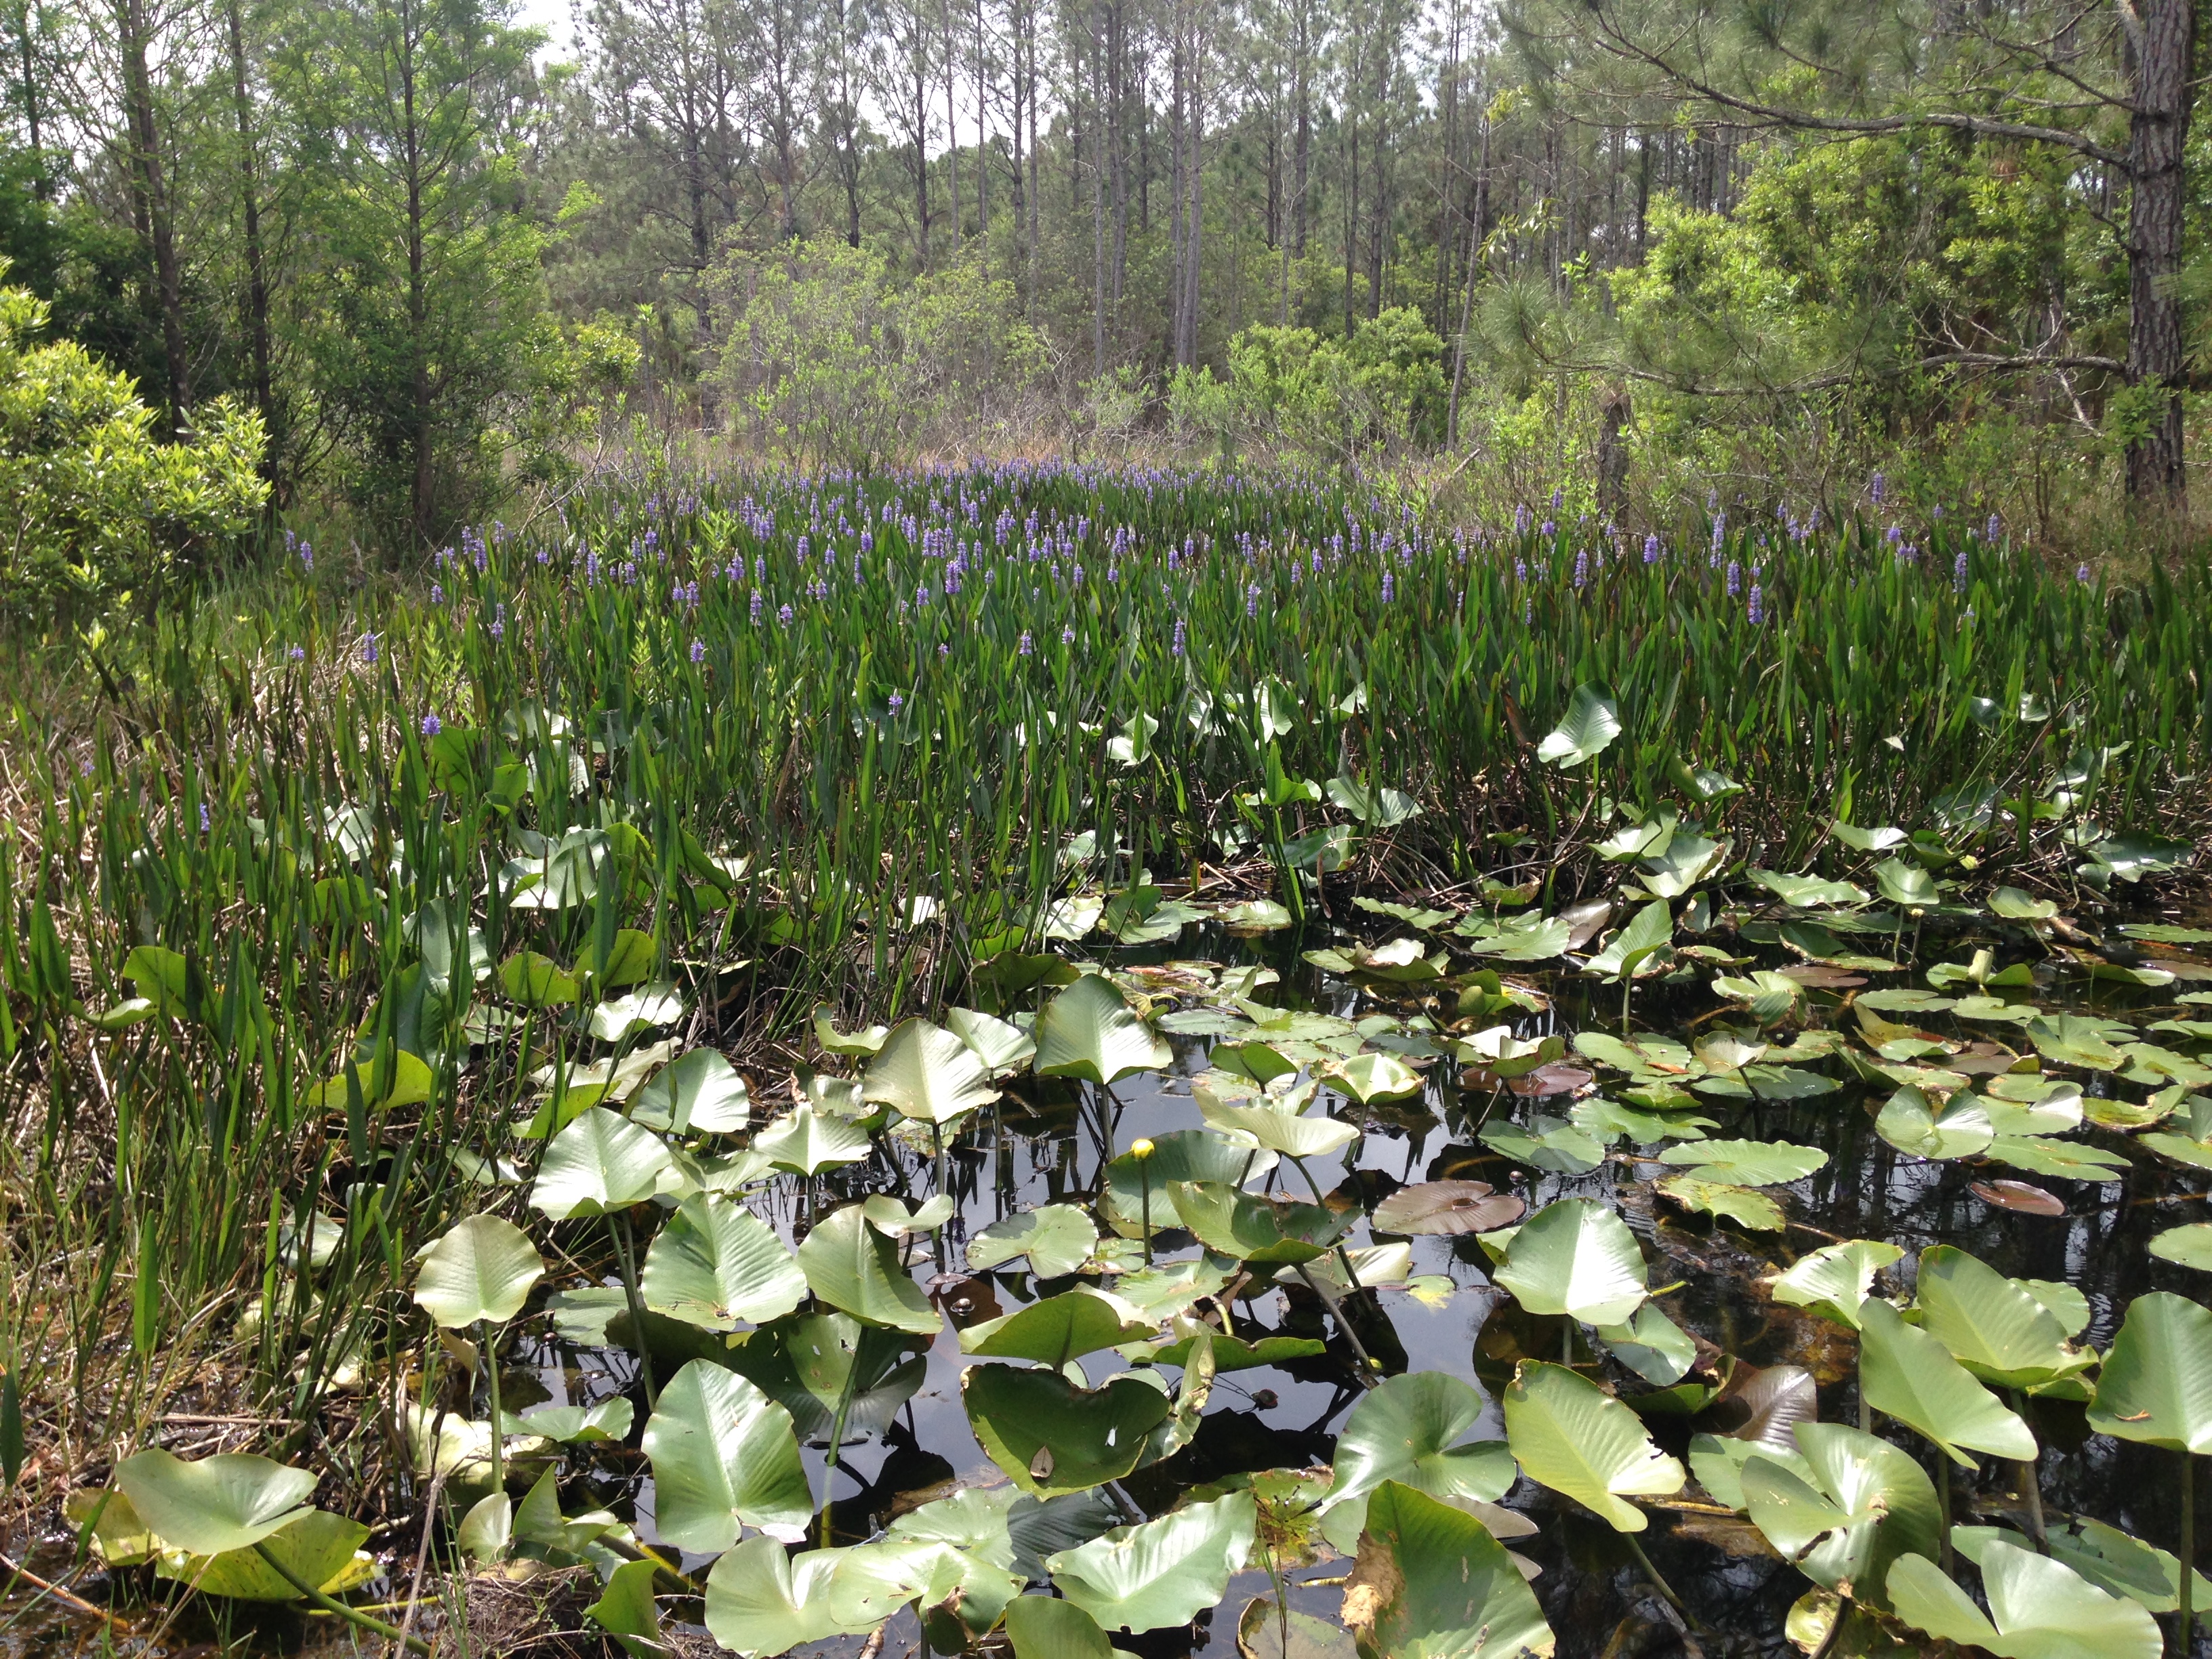 An image of a marsh with lots of plants growing out of the water.